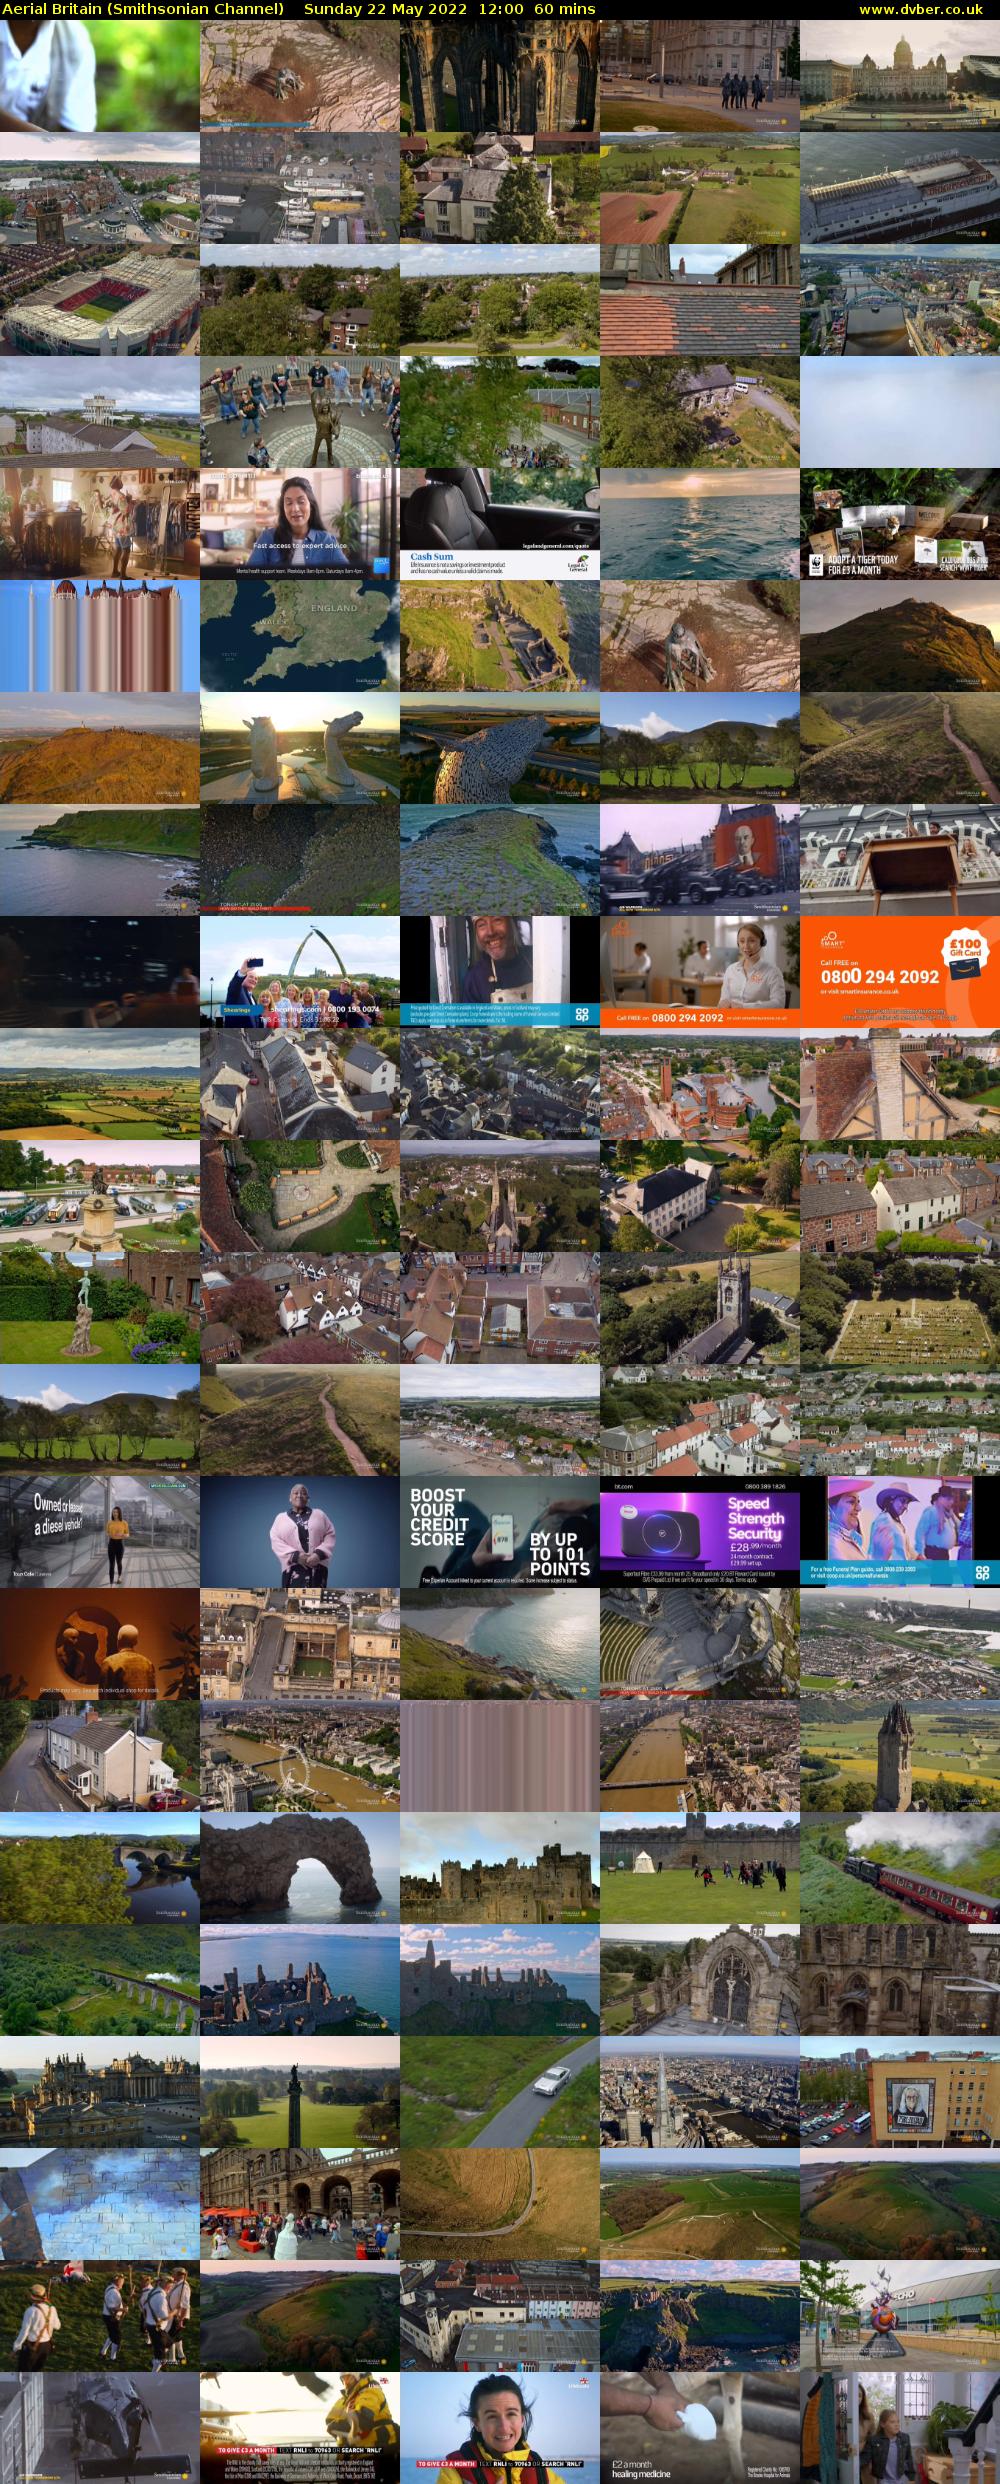 Aerial Britain (Smithsonian Channel) Sunday 22 May 2022 12:00 - 13:00